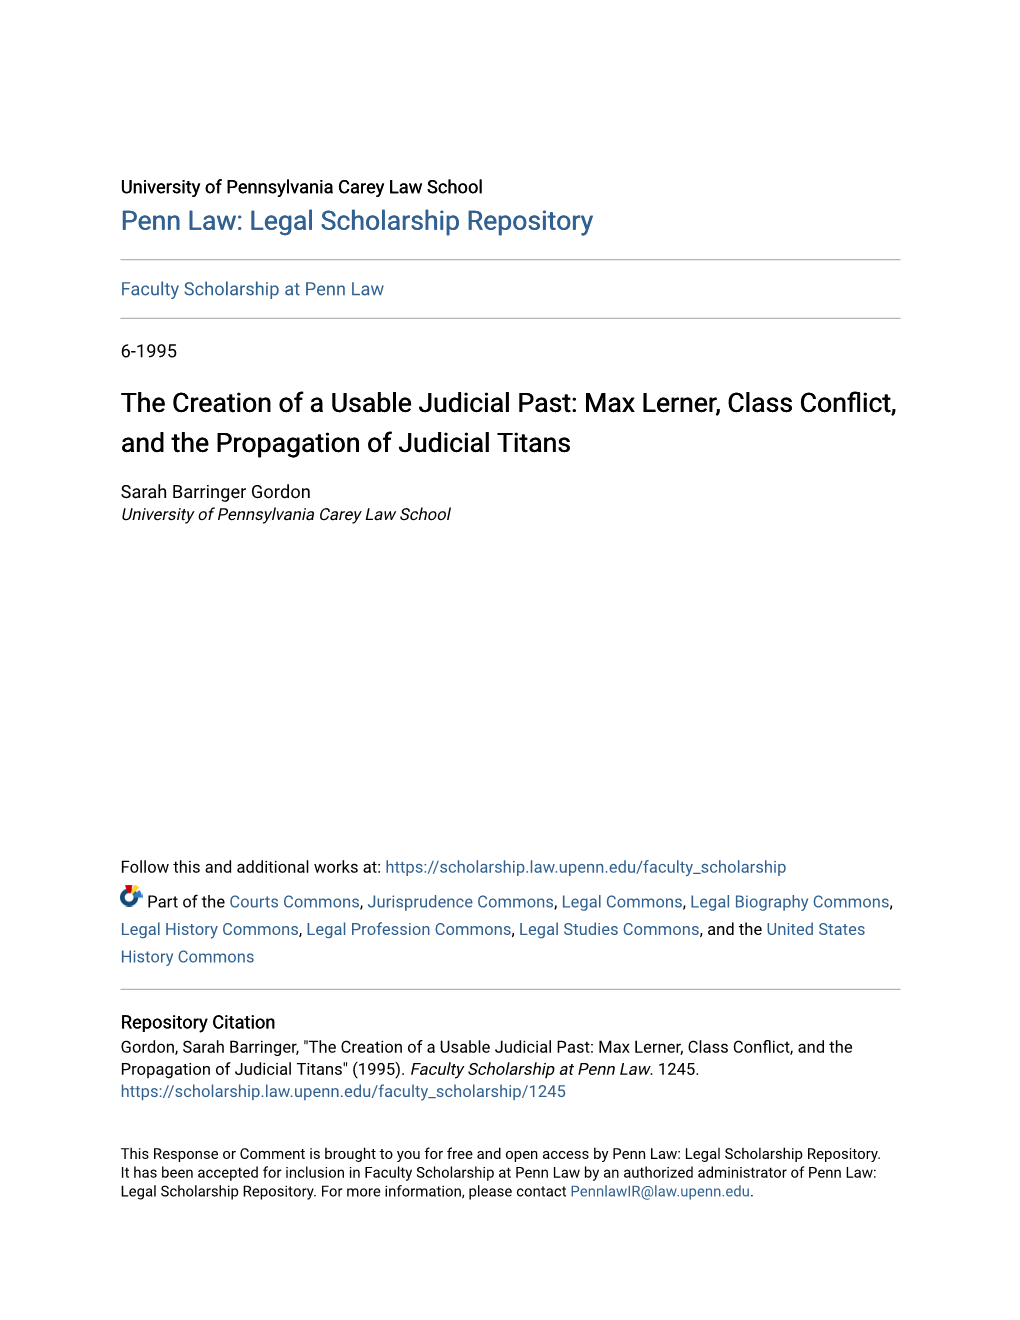 Max Lerner, Class Conflict, and the Propagation of Judicial Titans